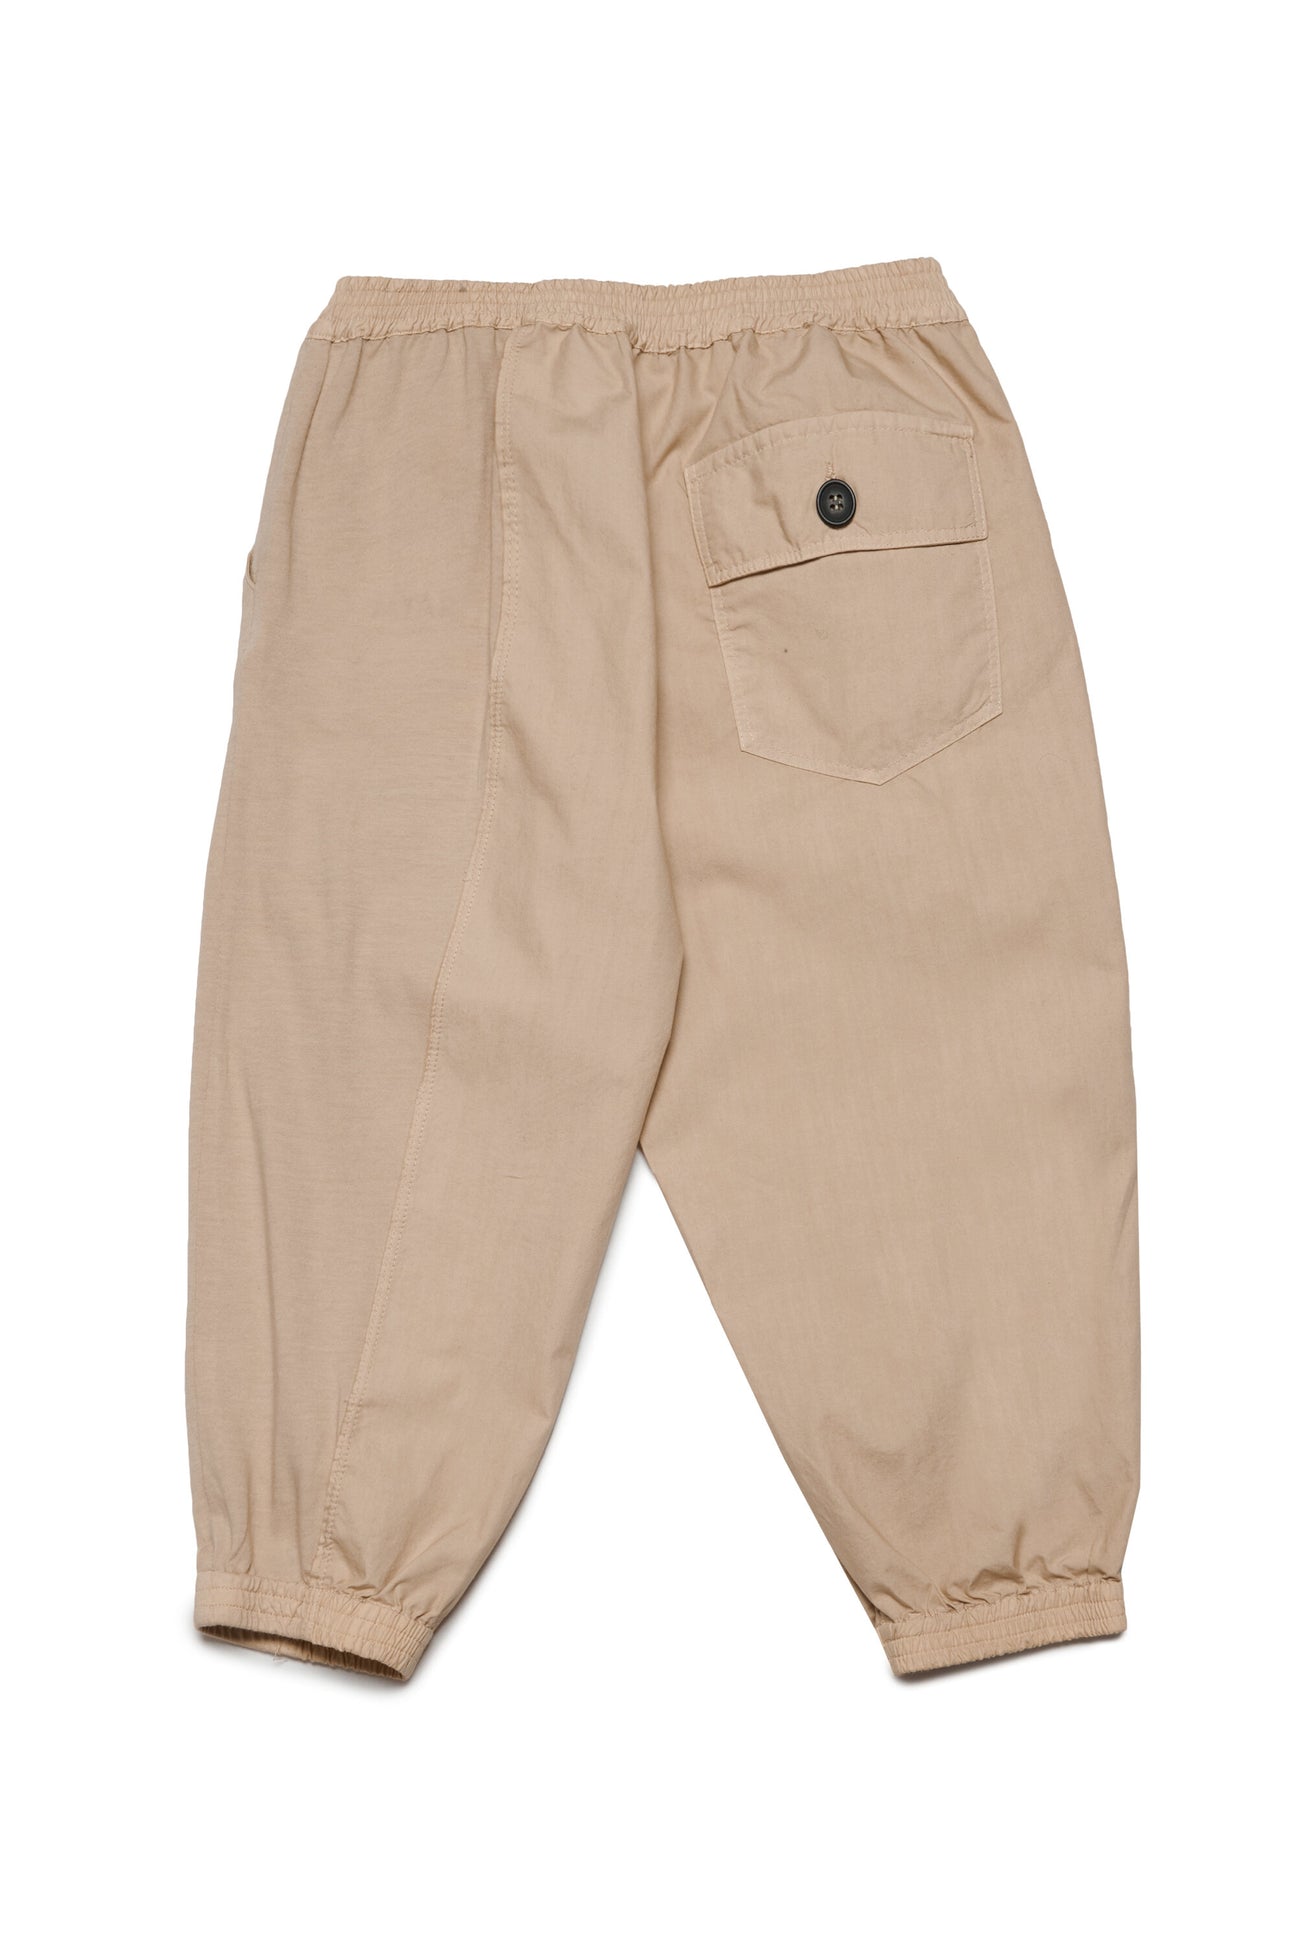 Deadstock fabric pants with MYAR logo Deadstock fabric pants with MYAR logo